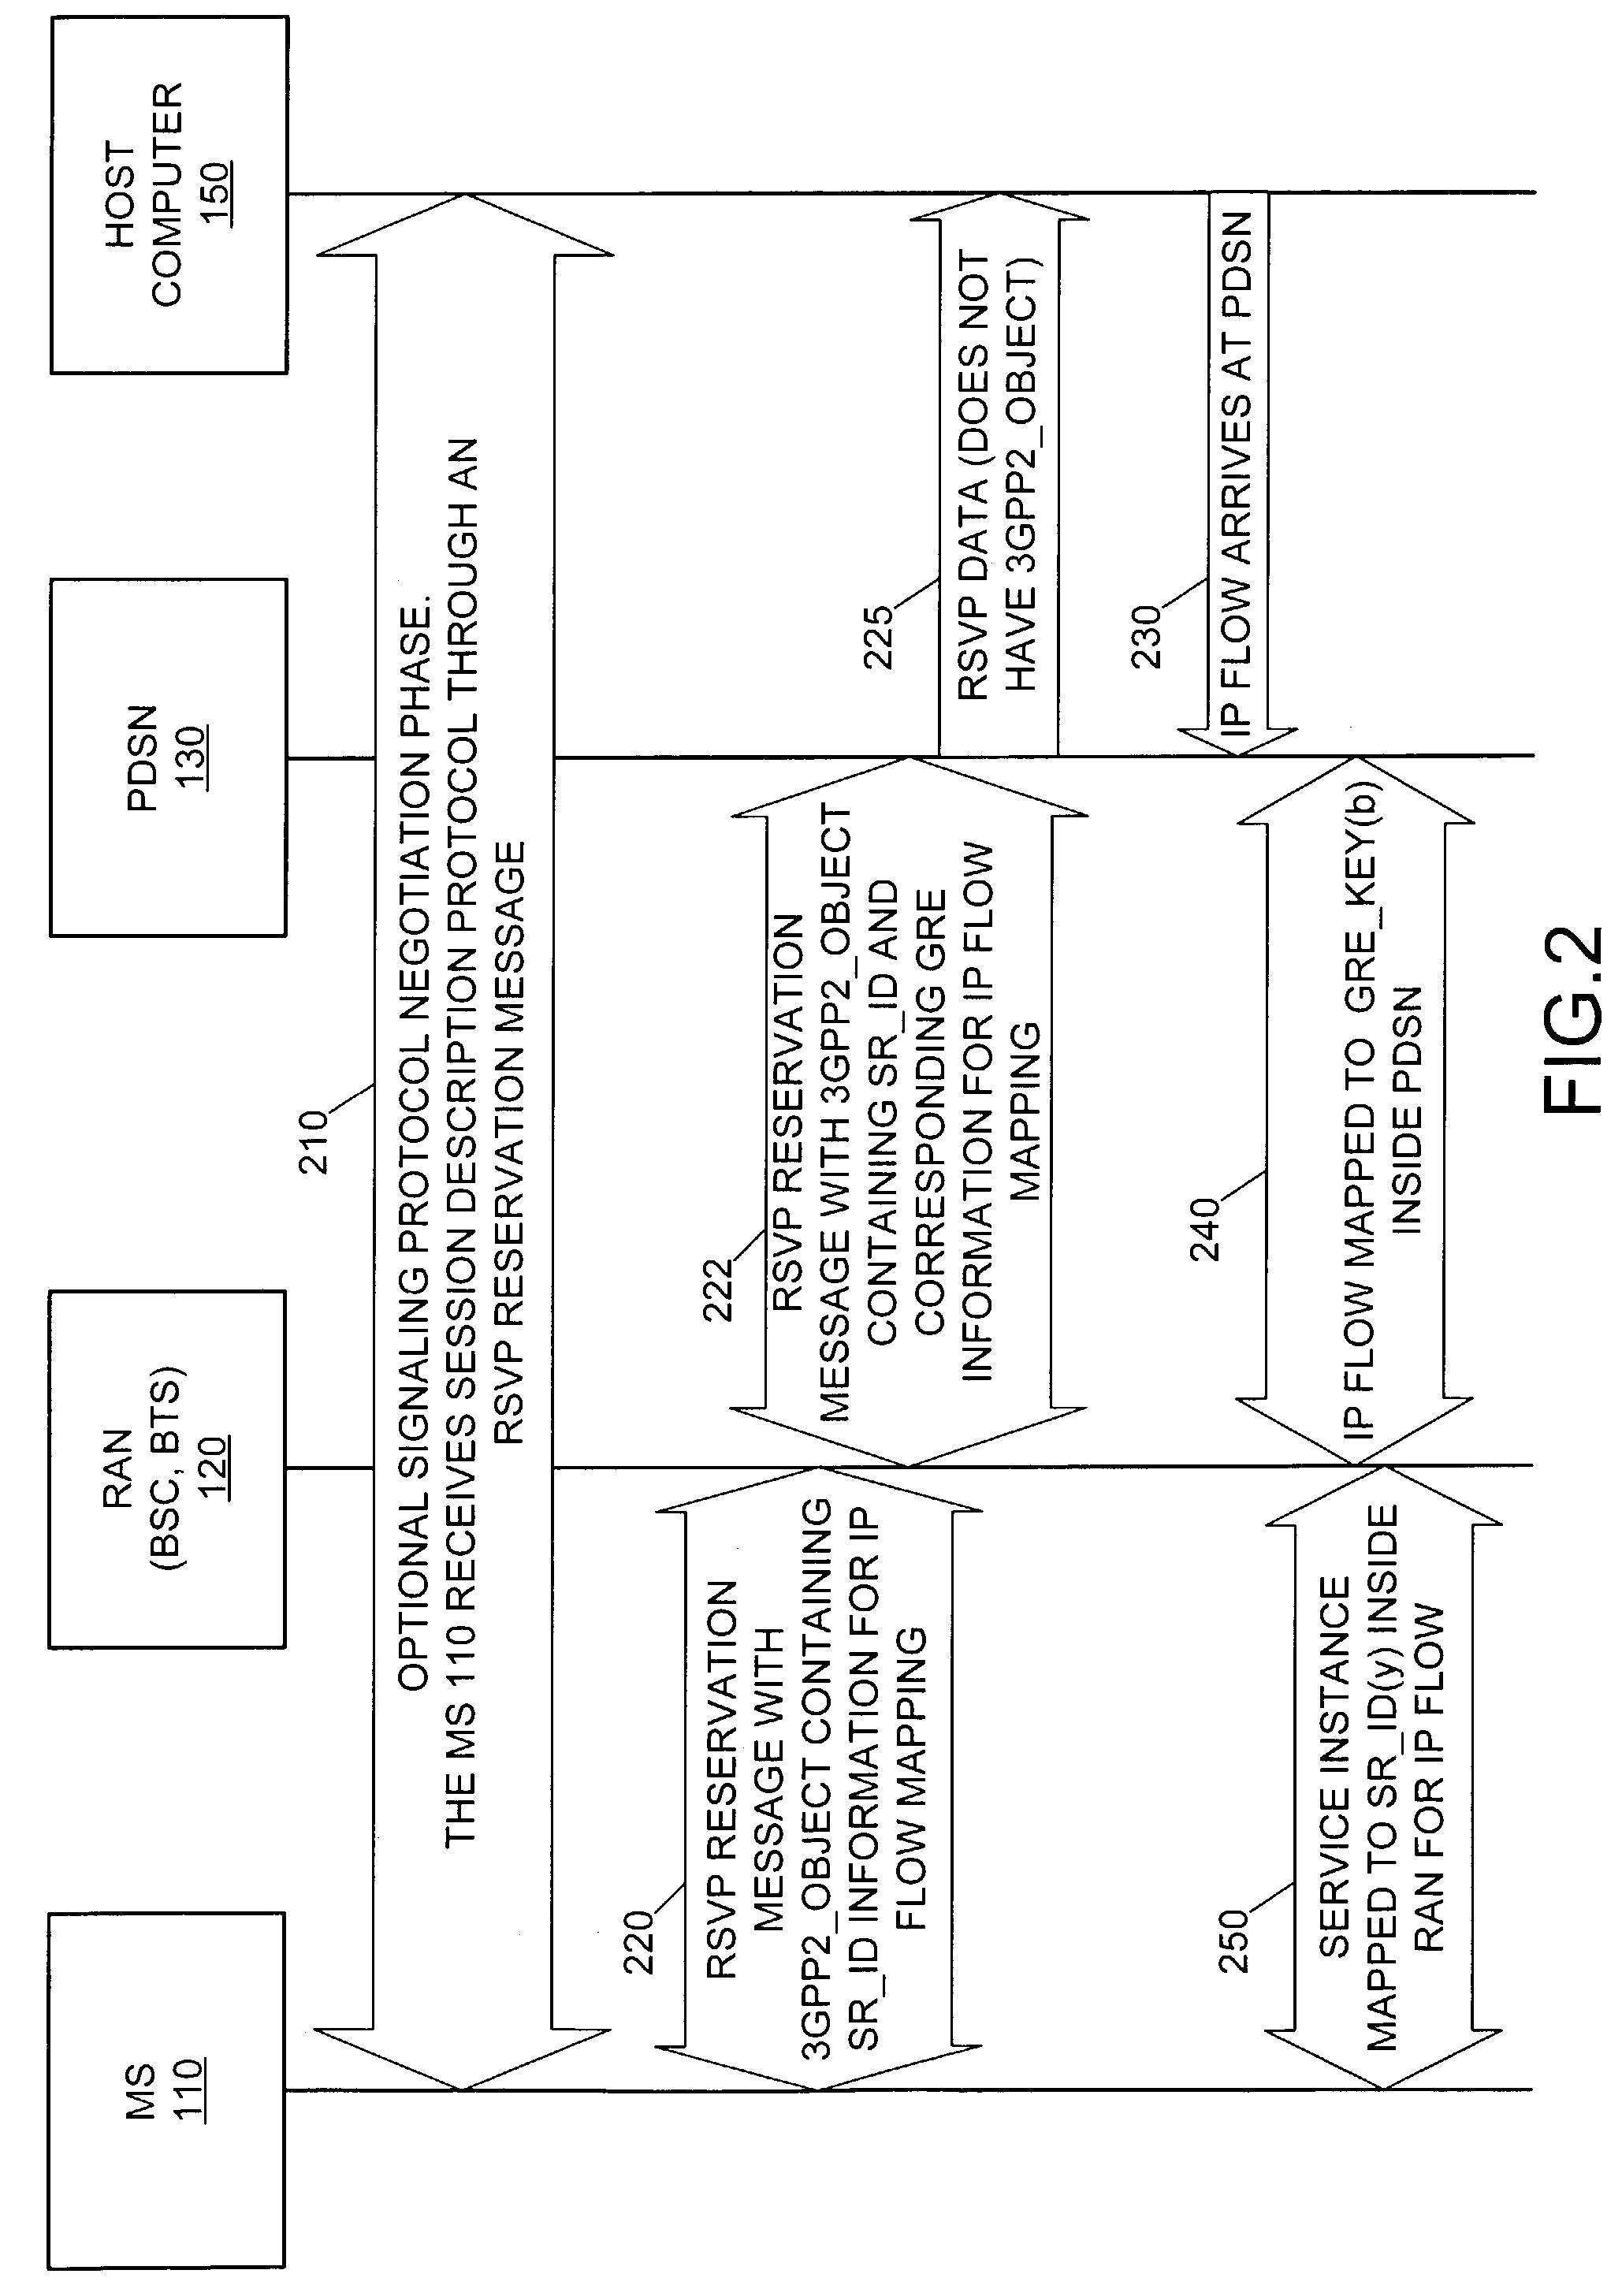 Method for dynamic flow mapping in a wireless network